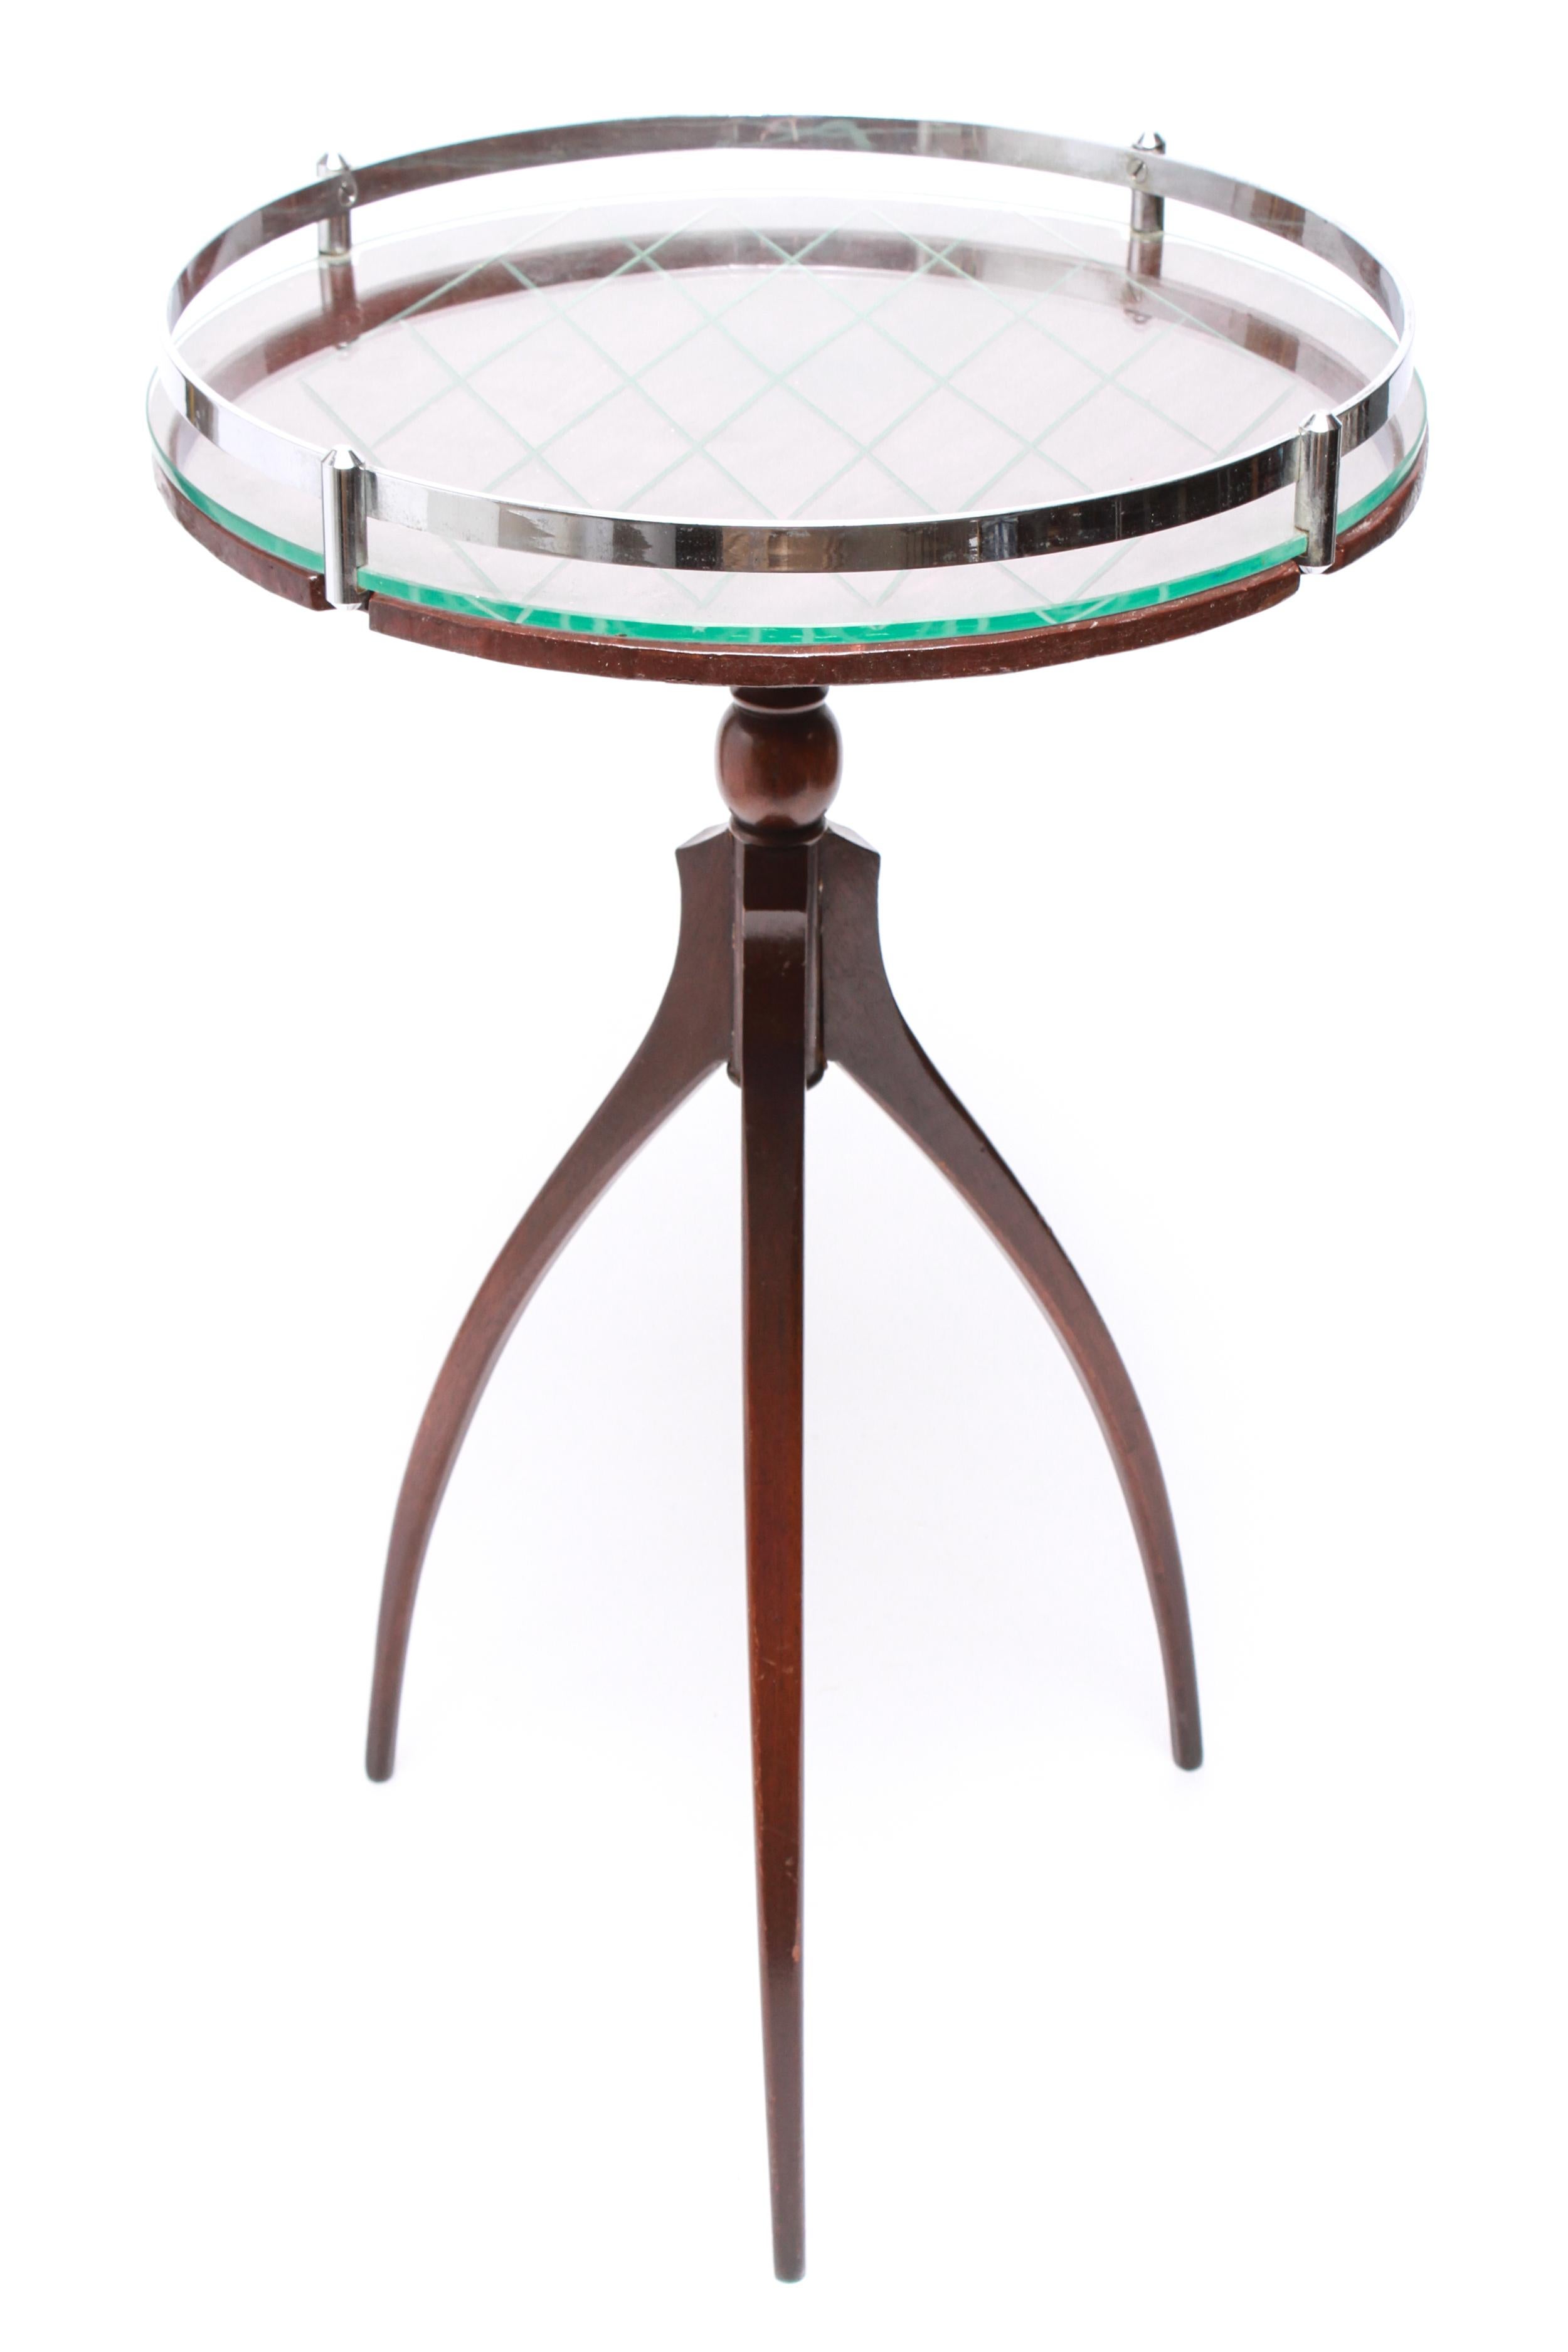 Art Deco style tripod side table in wood with a removable glass serving tray top with a chromed metal gallery and an etched diamond motif. The piece is in great vintage condition with age-appropriate wear.